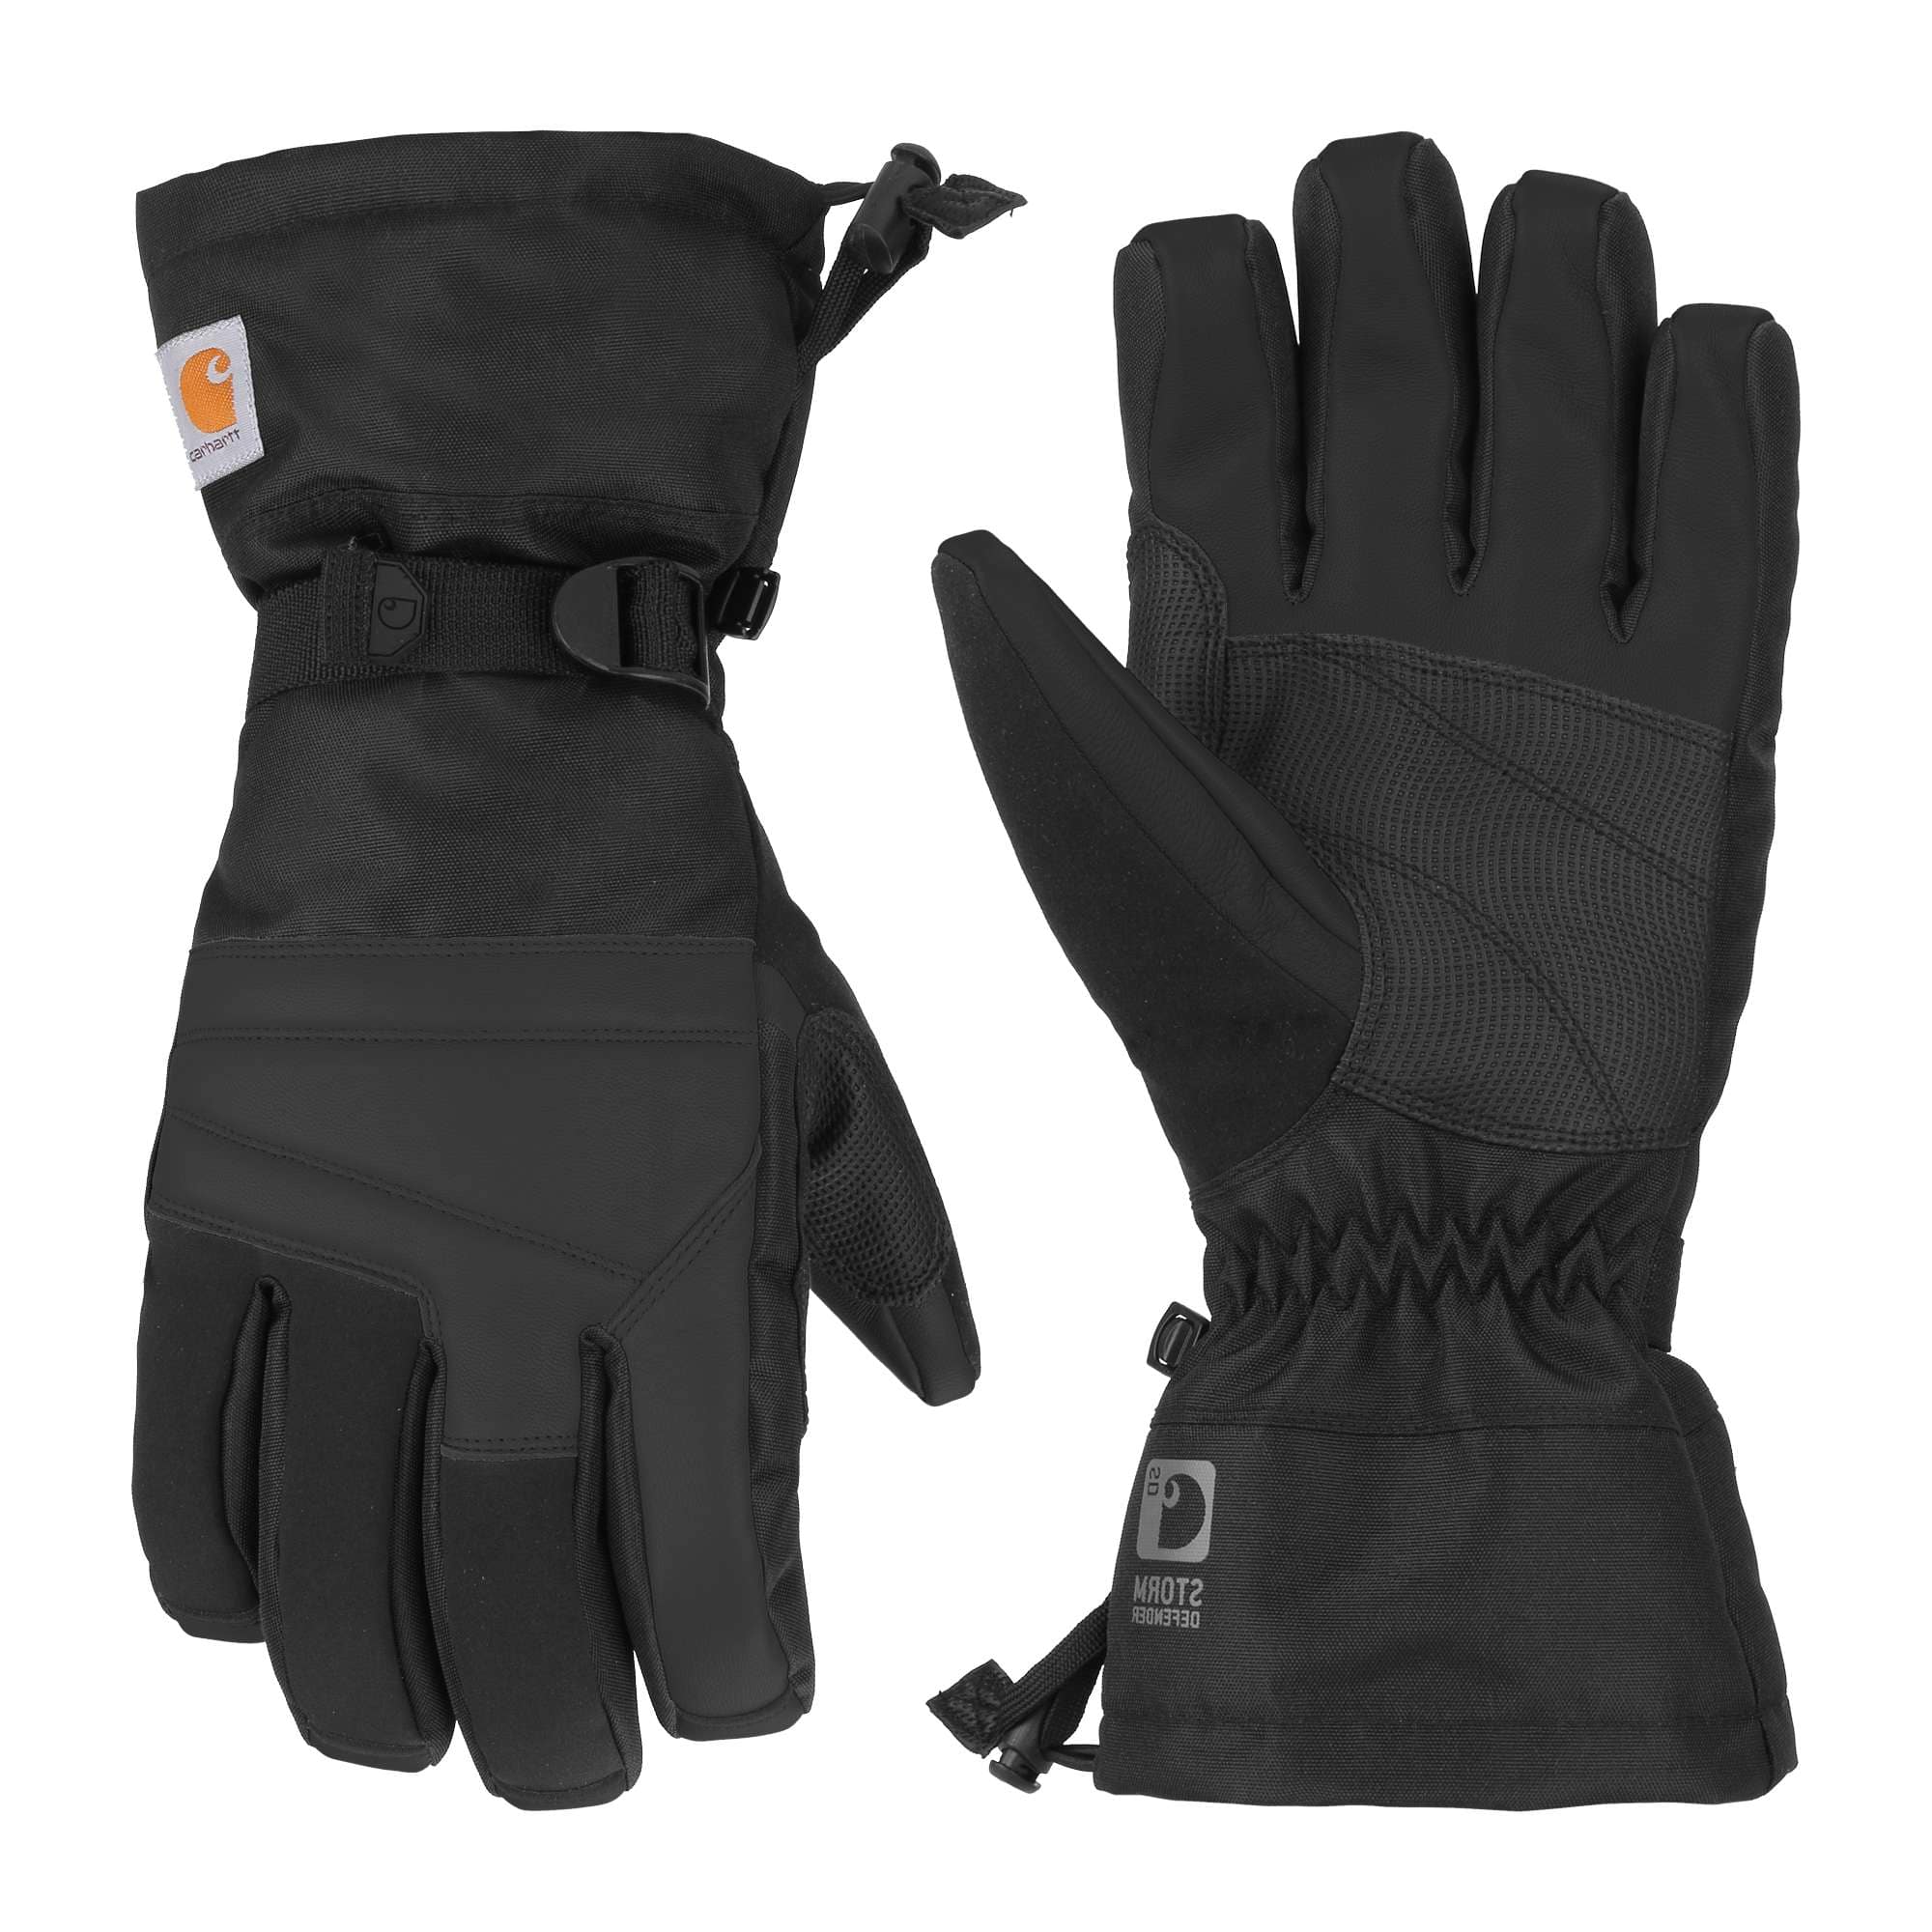 Cold Snap Insulated Glove